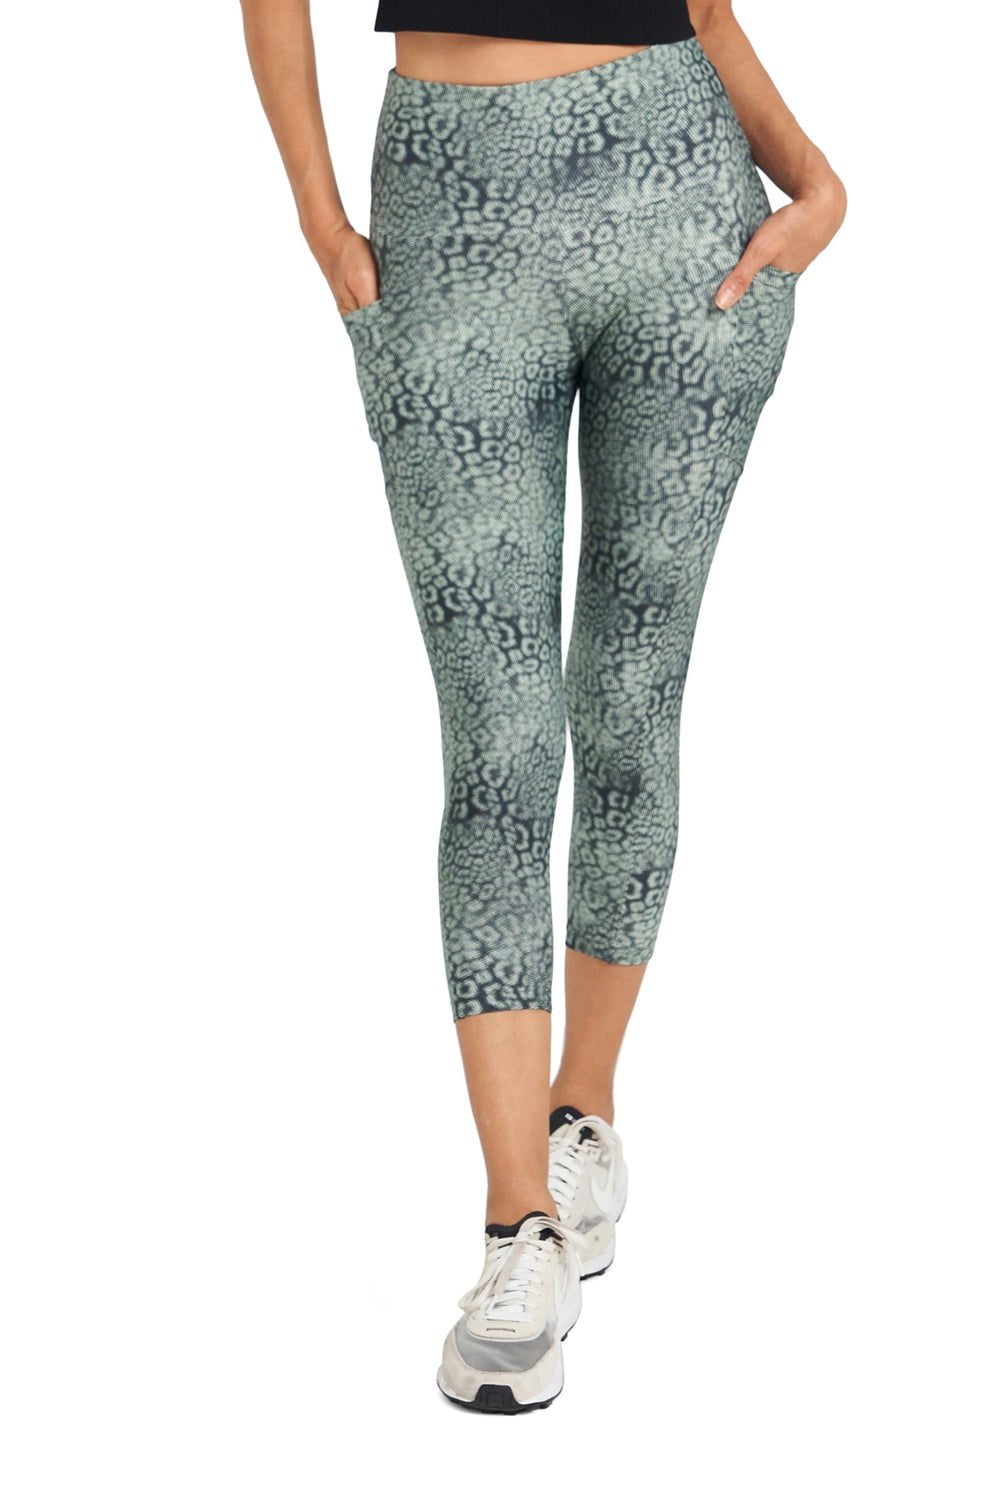 High waisted Mid Calf Leggings with Pockets - High support printed shorts-  Brasilfit Activewear